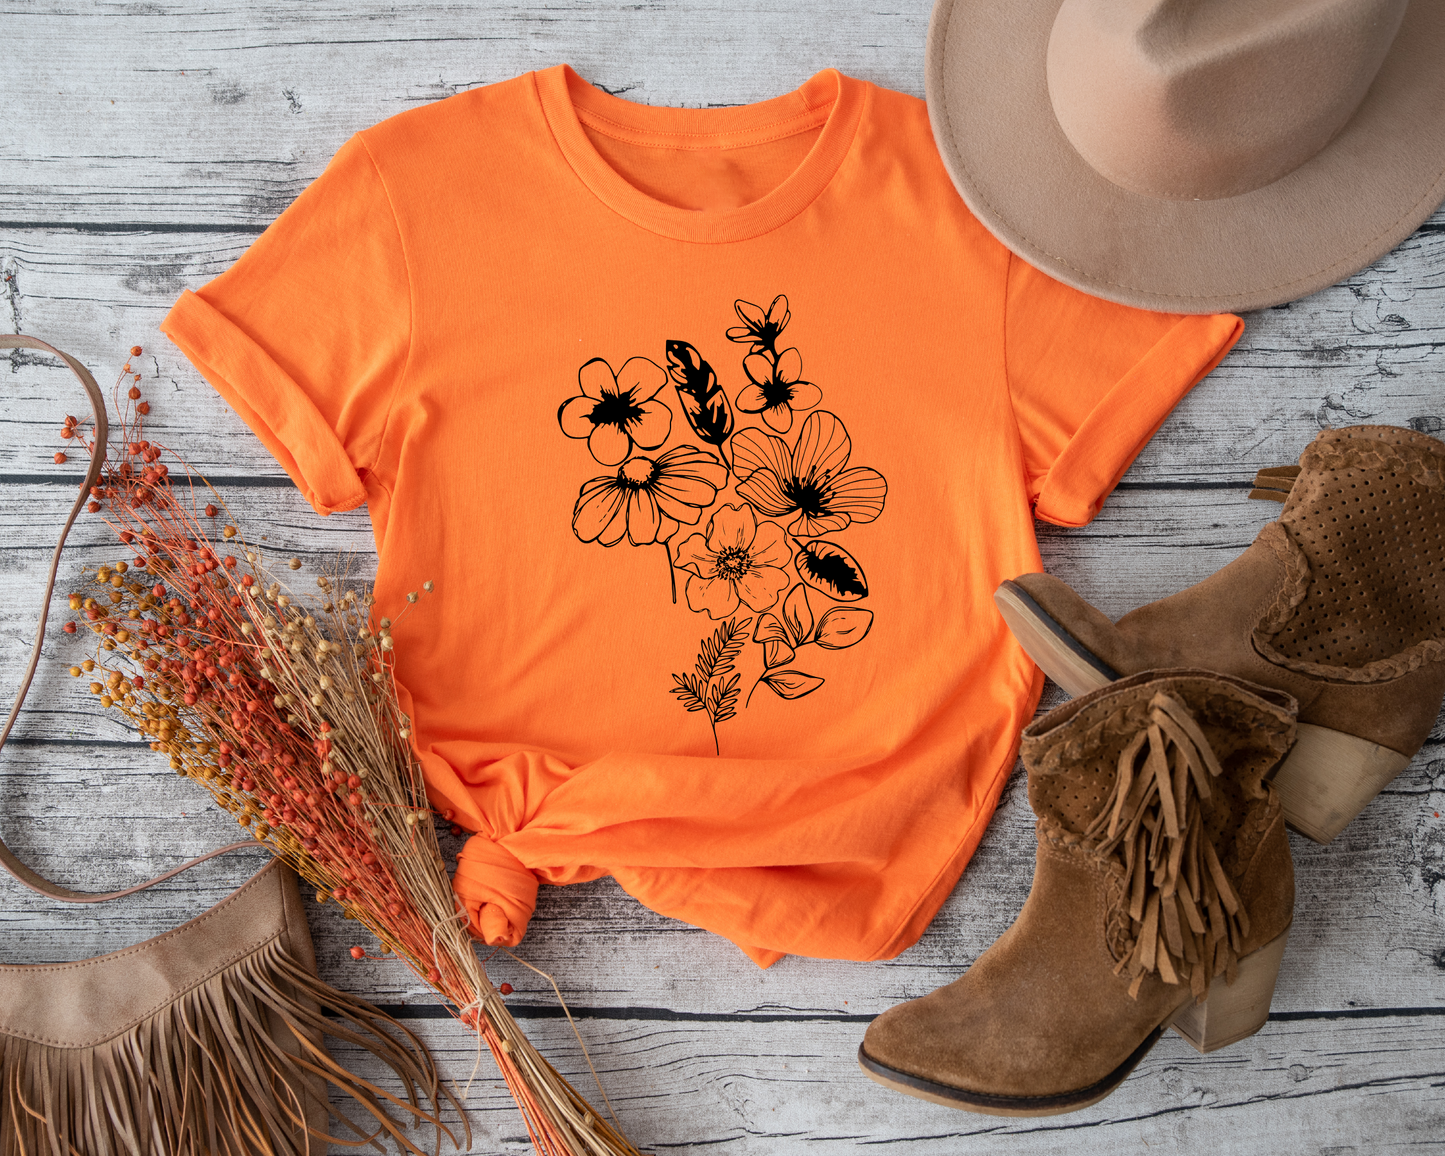 Celebrate the simple joys of life with this unique and eye-catching "Wildflower" t-shirt.